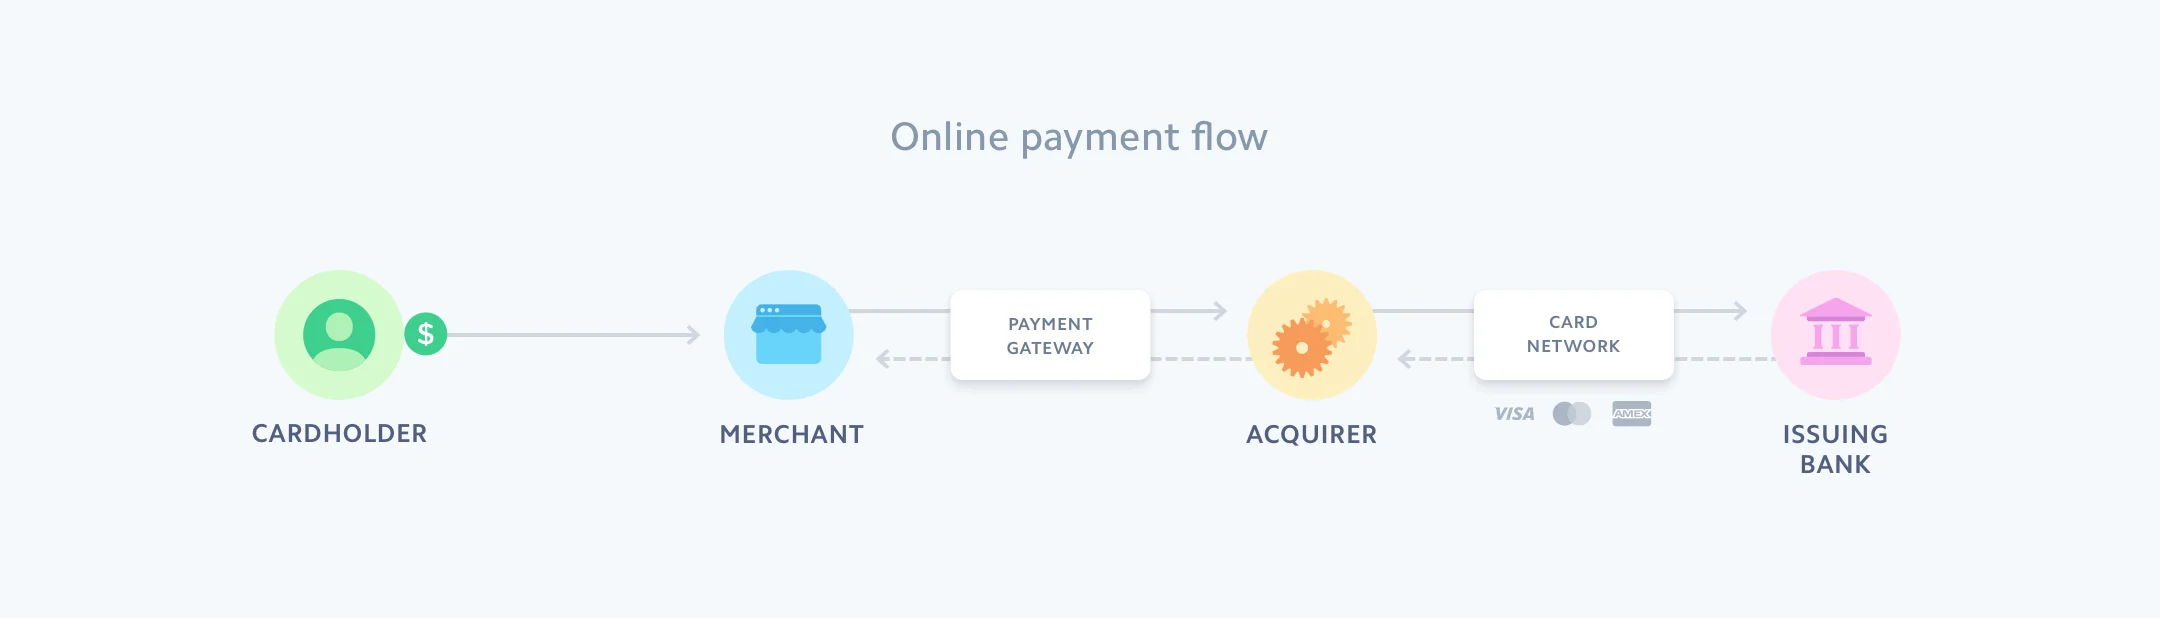 online-payments-flow.png